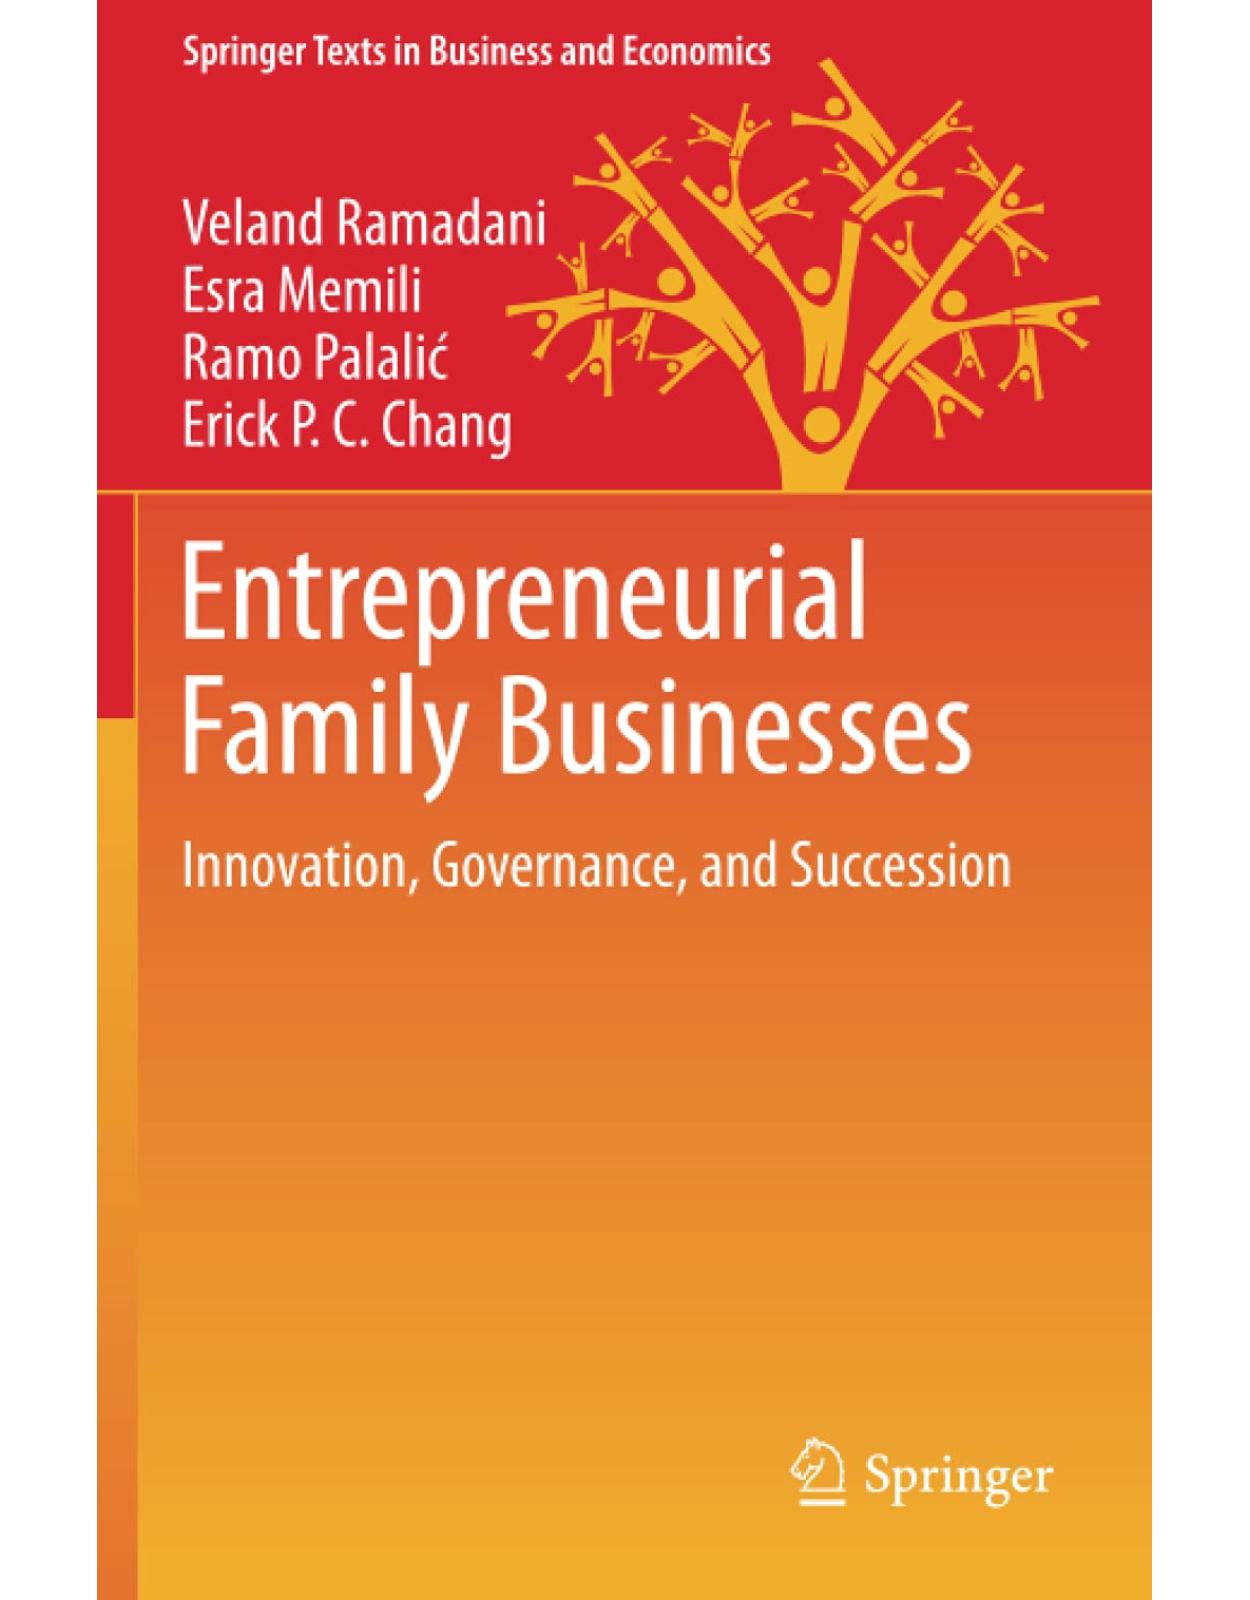 Entrepreneurial Family Businesses: Innovation, Governance, and Succession